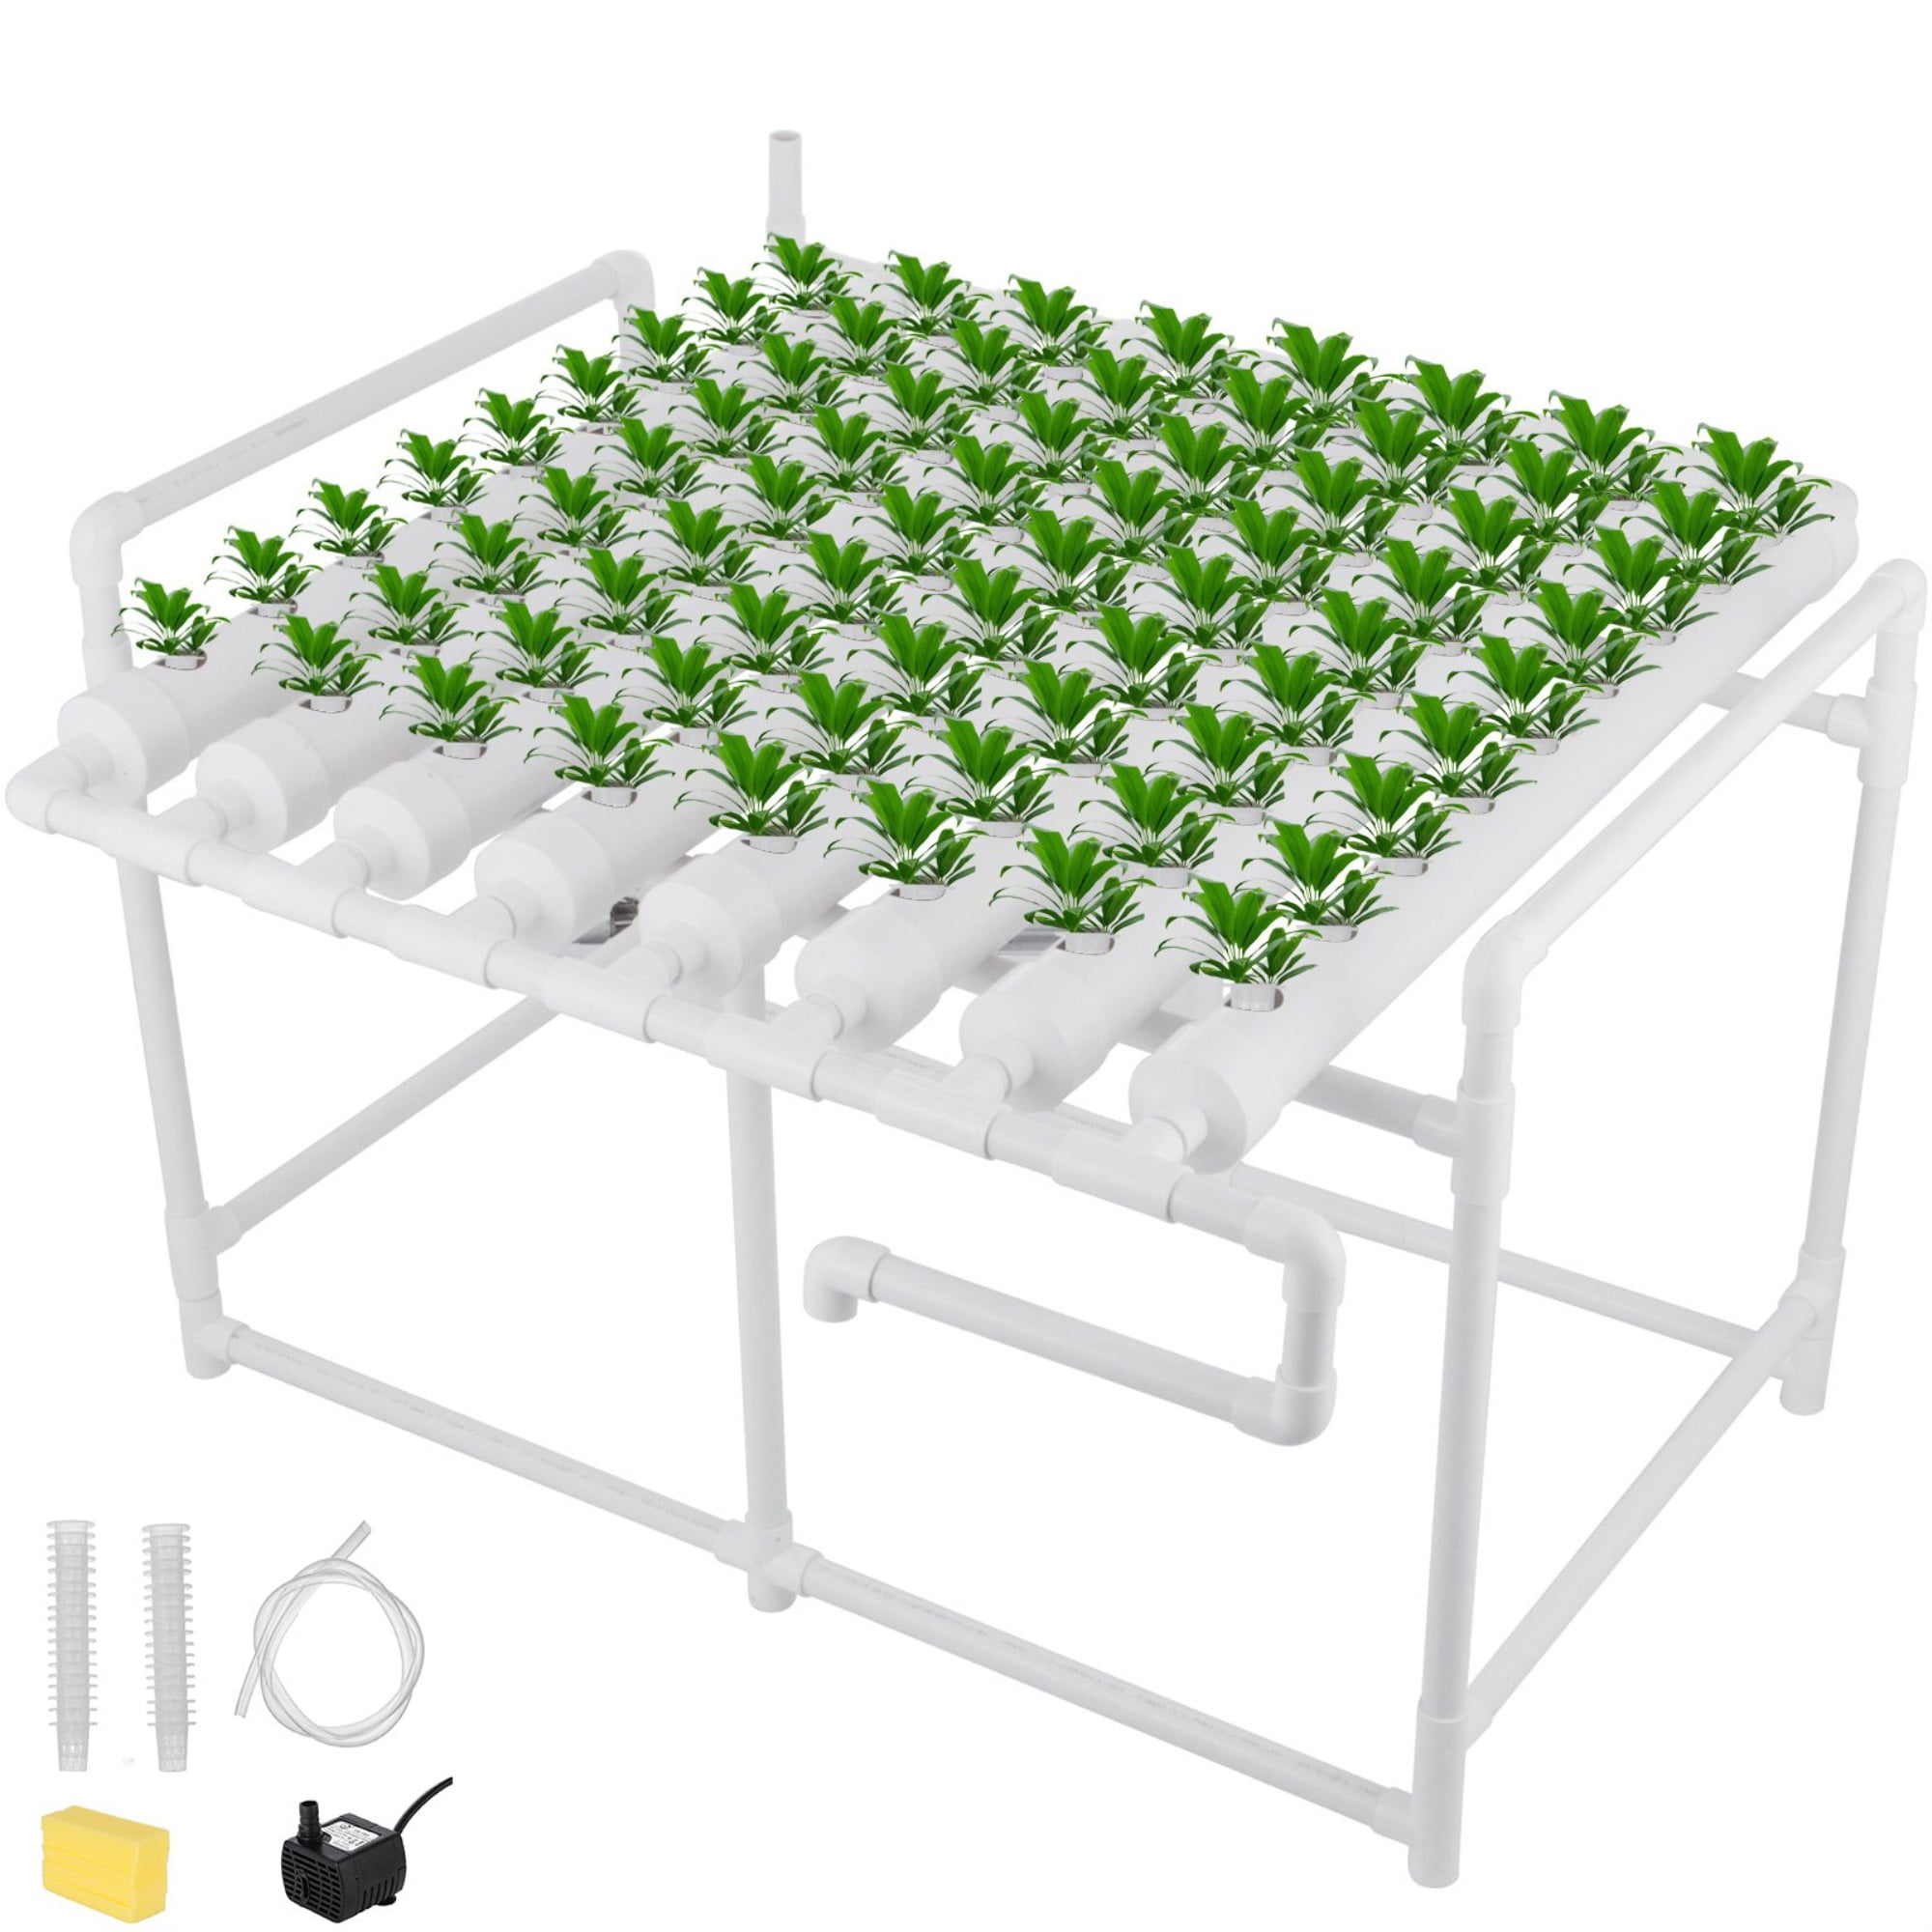 Hydroponic Site Grow Kit 72 Site Deep Water Culture Garden System Plant 